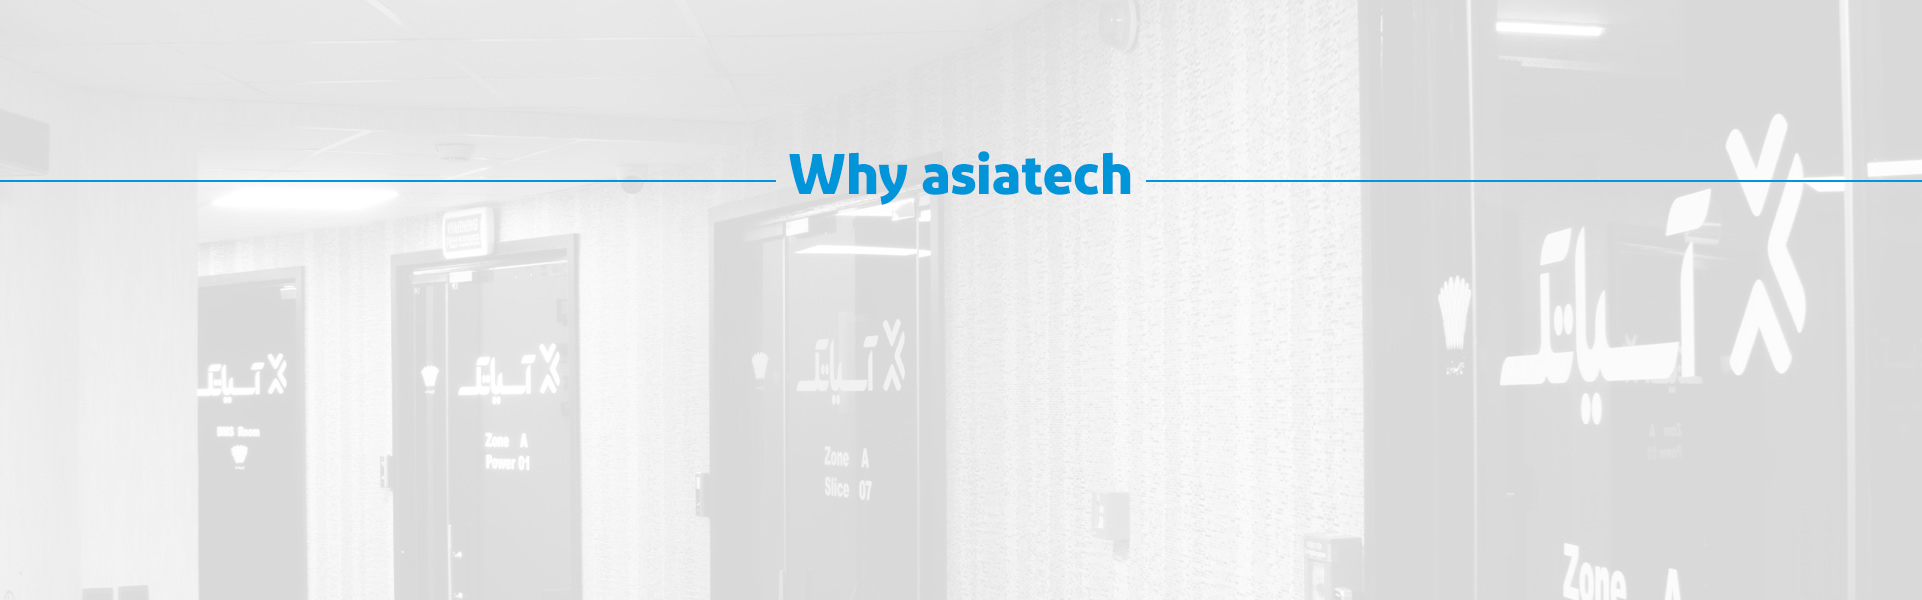 why-asiatech